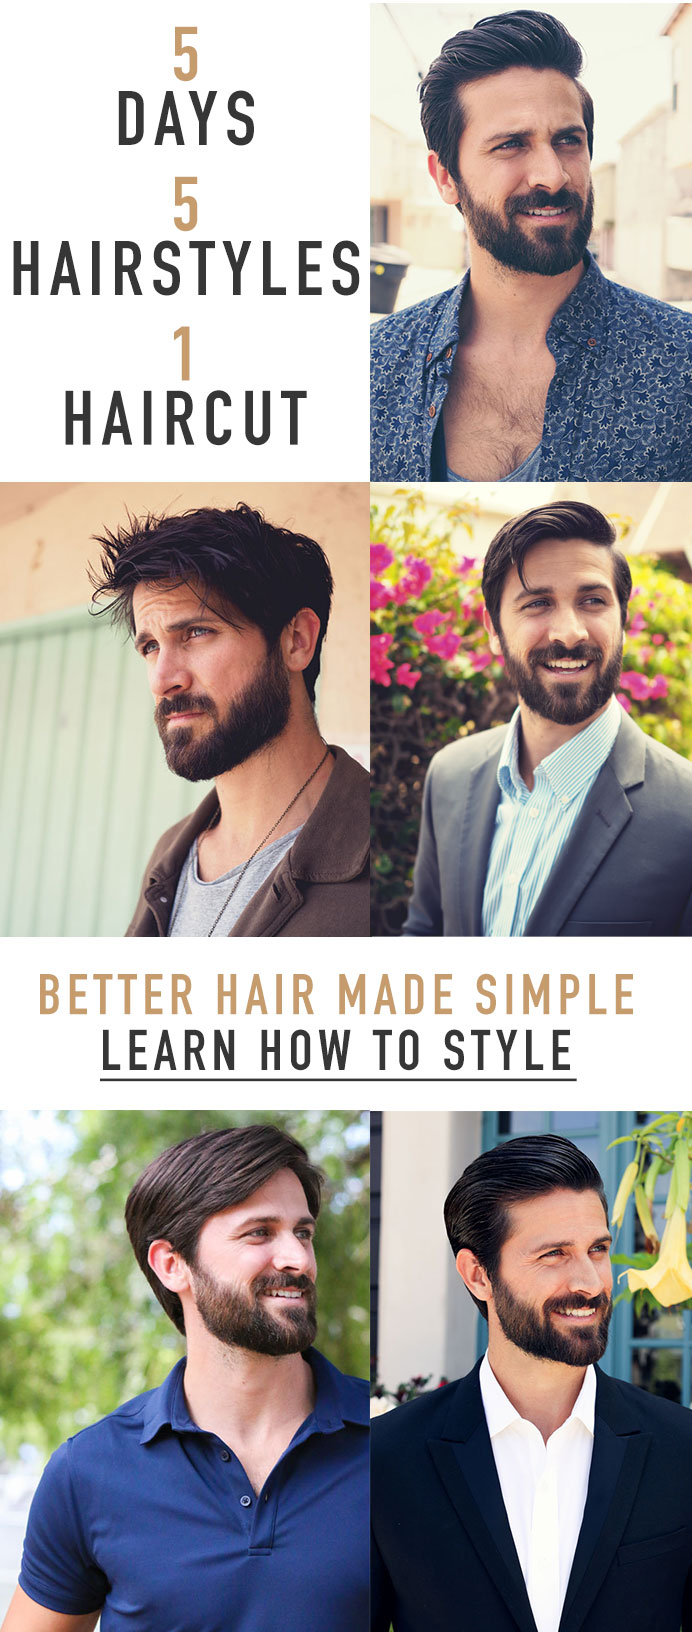 5 Days, 5 Hairstyles, 1 Haircut - We'll Show You How to Have Better Hair,  Everyday | Primer